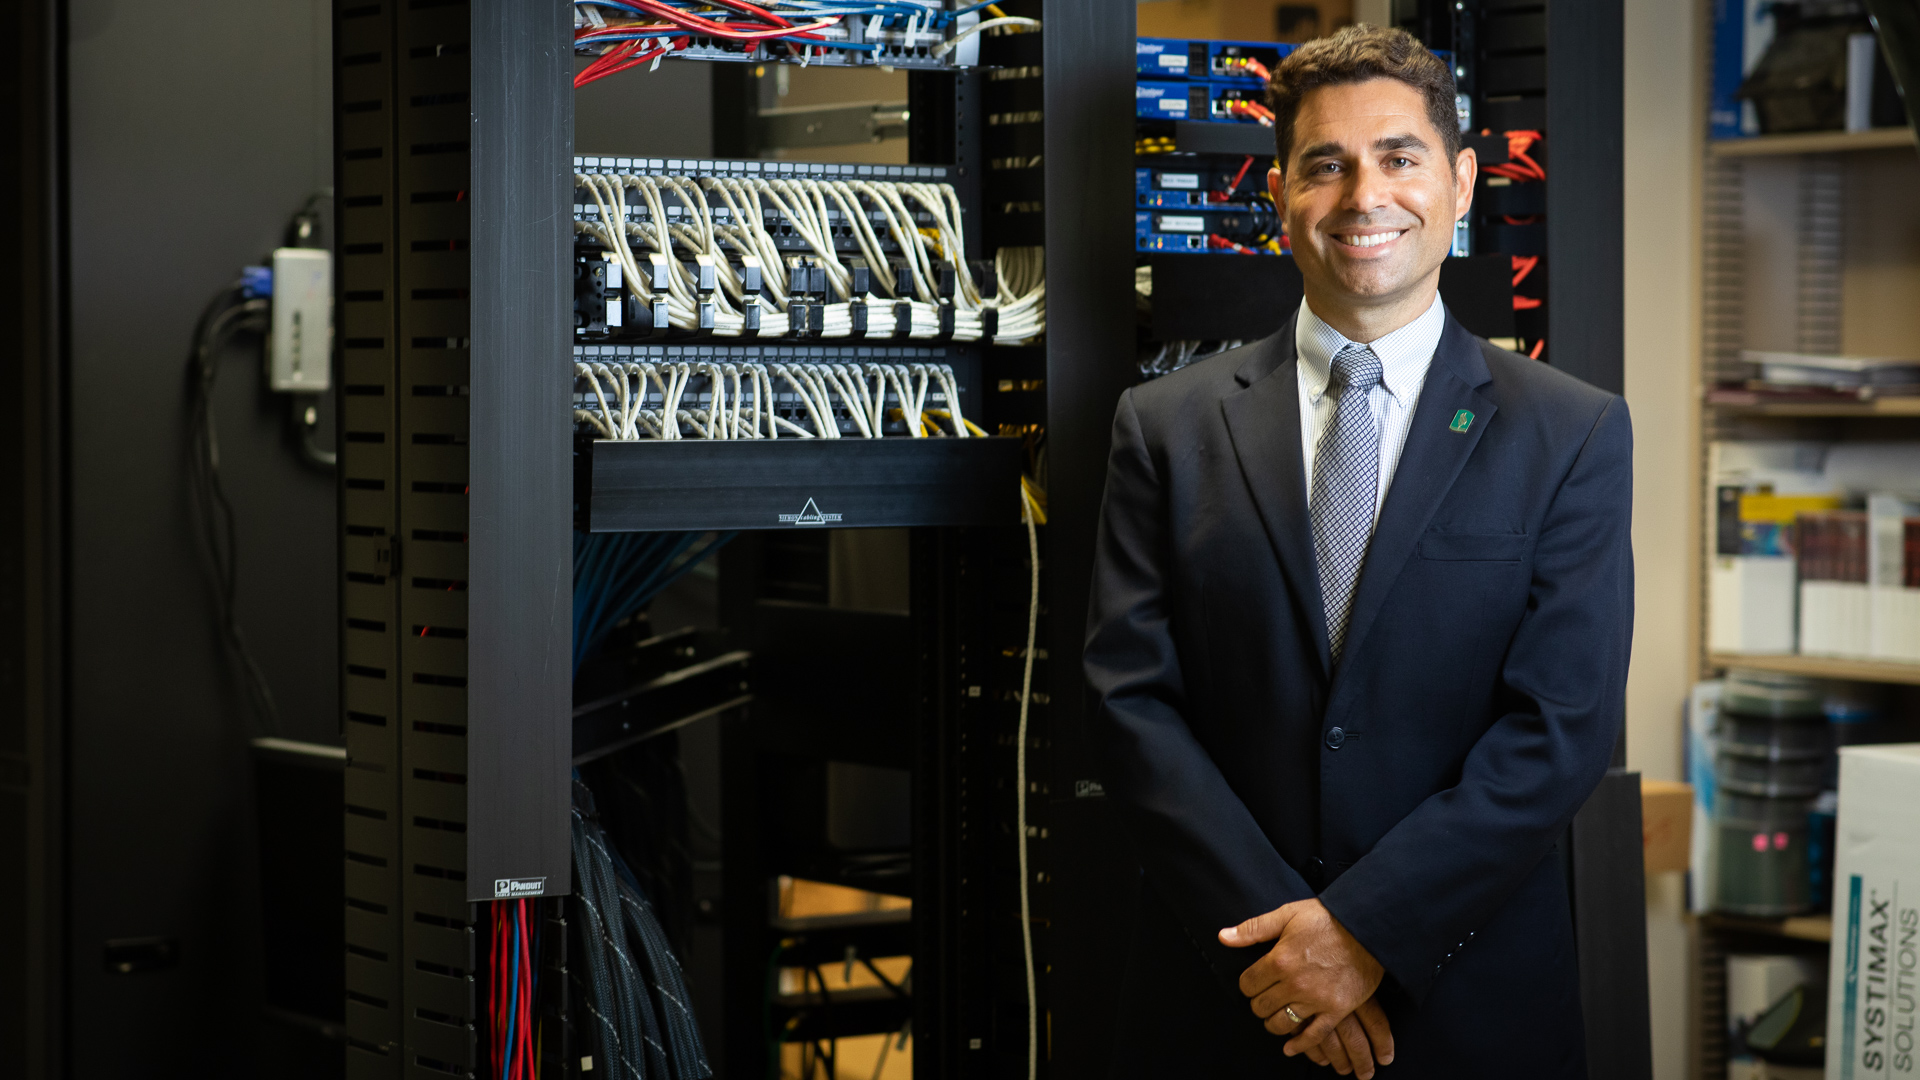 Kevan Shafizadeh, Sac State’s new dean of the College of Engineering and Computer Science, poses in a computer server room at Riverside Hall.